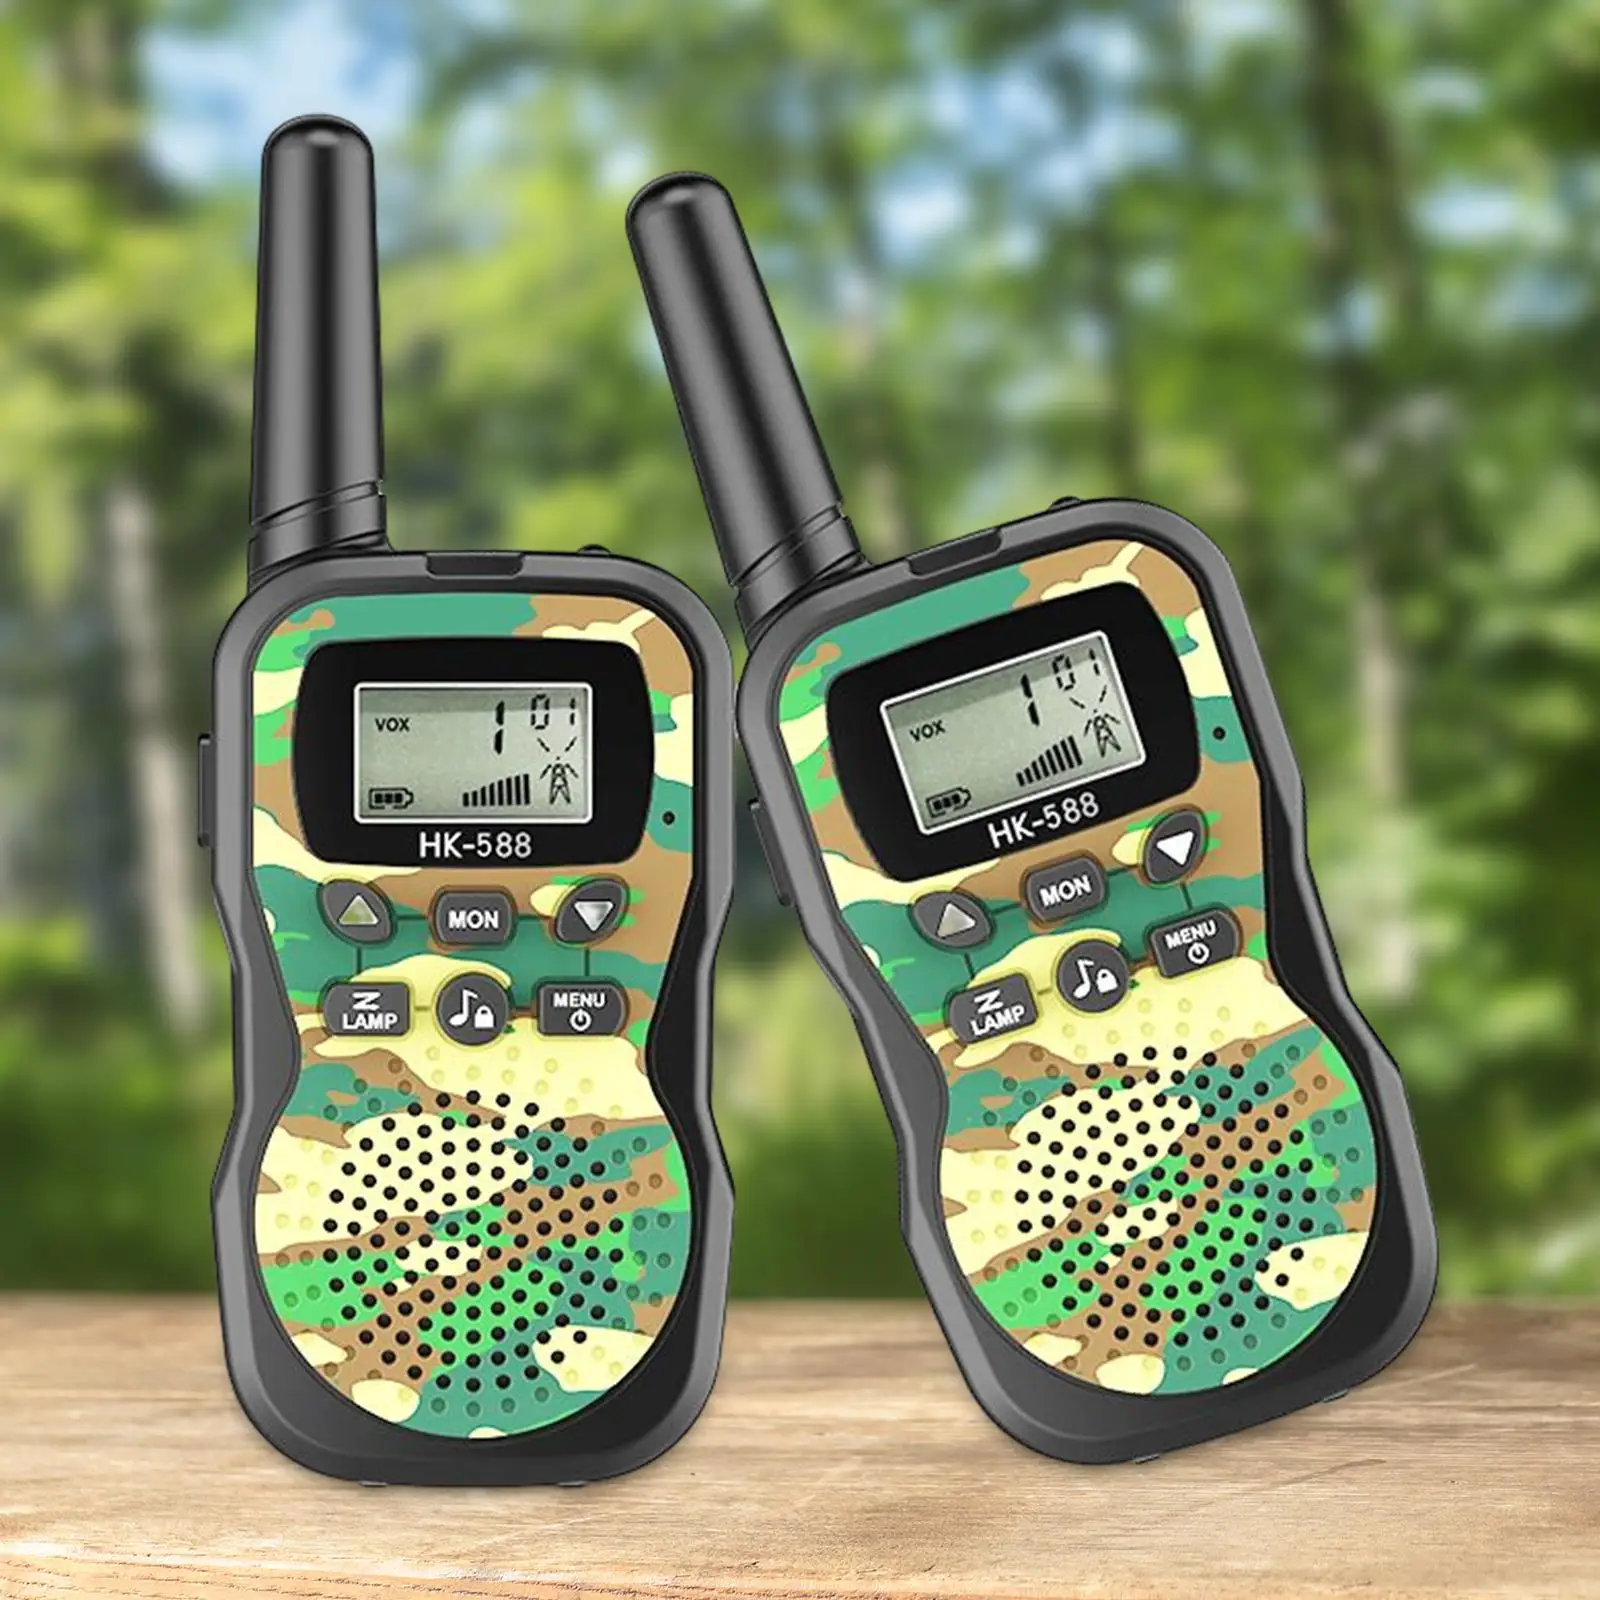 Outdoor Kids Walkie Talkies Toy 2 Way Radios Children Toy for Kids Aged 3 and up Good Performance Smooth Edges Interactive